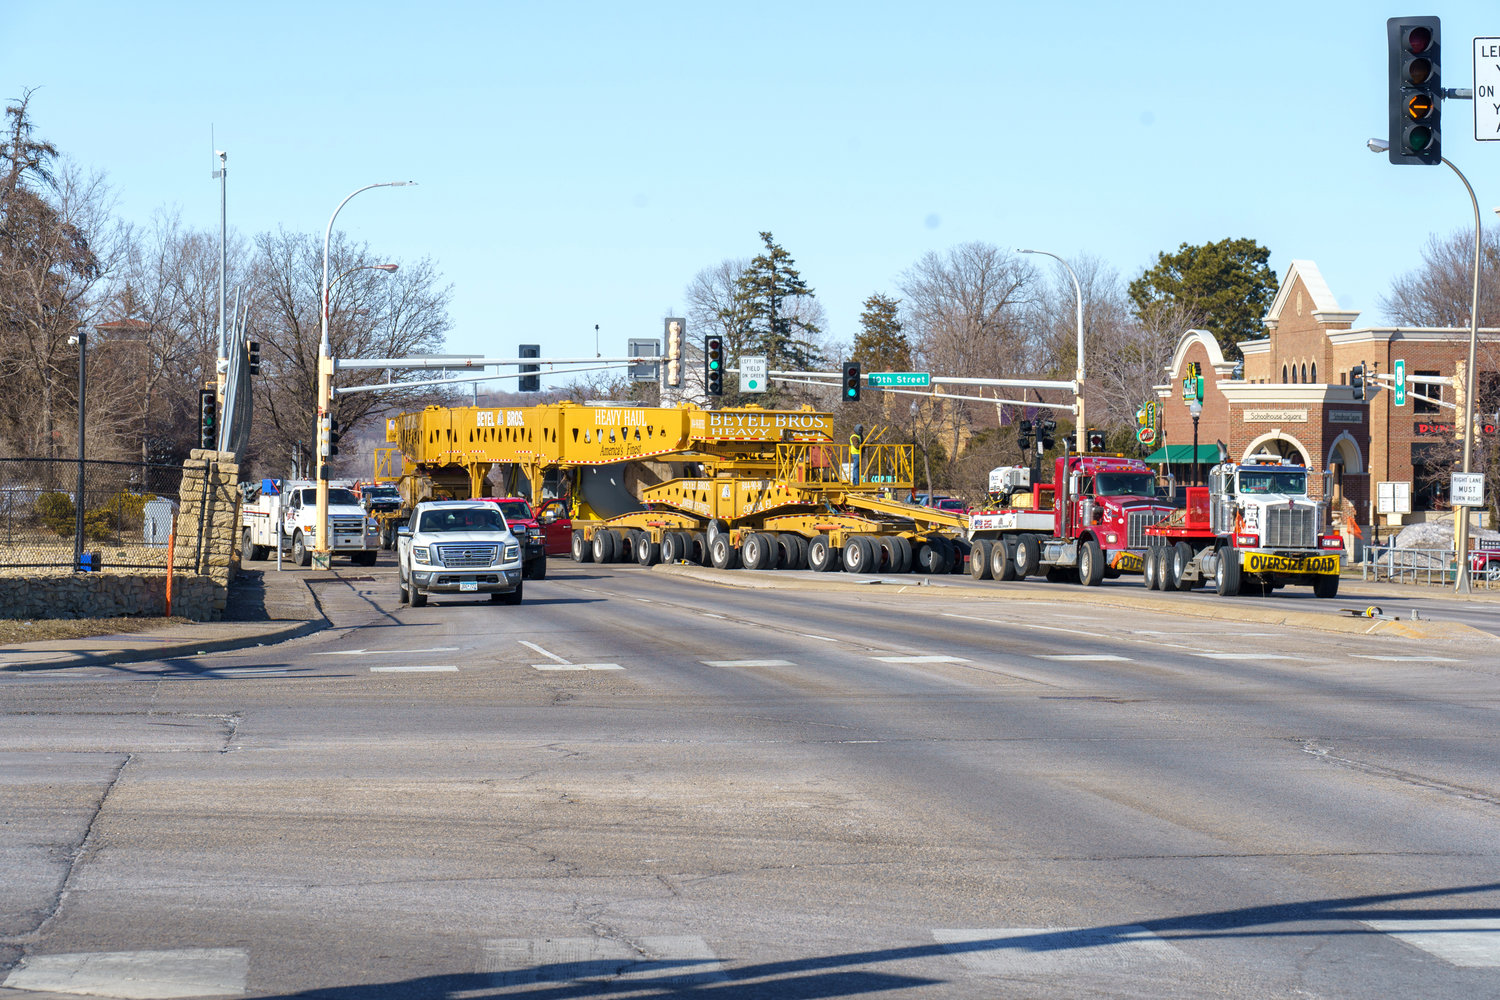 The 350 foot long, 22 foot wide truck needed to use the wrong side of Highway 61 to make the turn onto the wrong side of Highway 55 because of its sheer size.